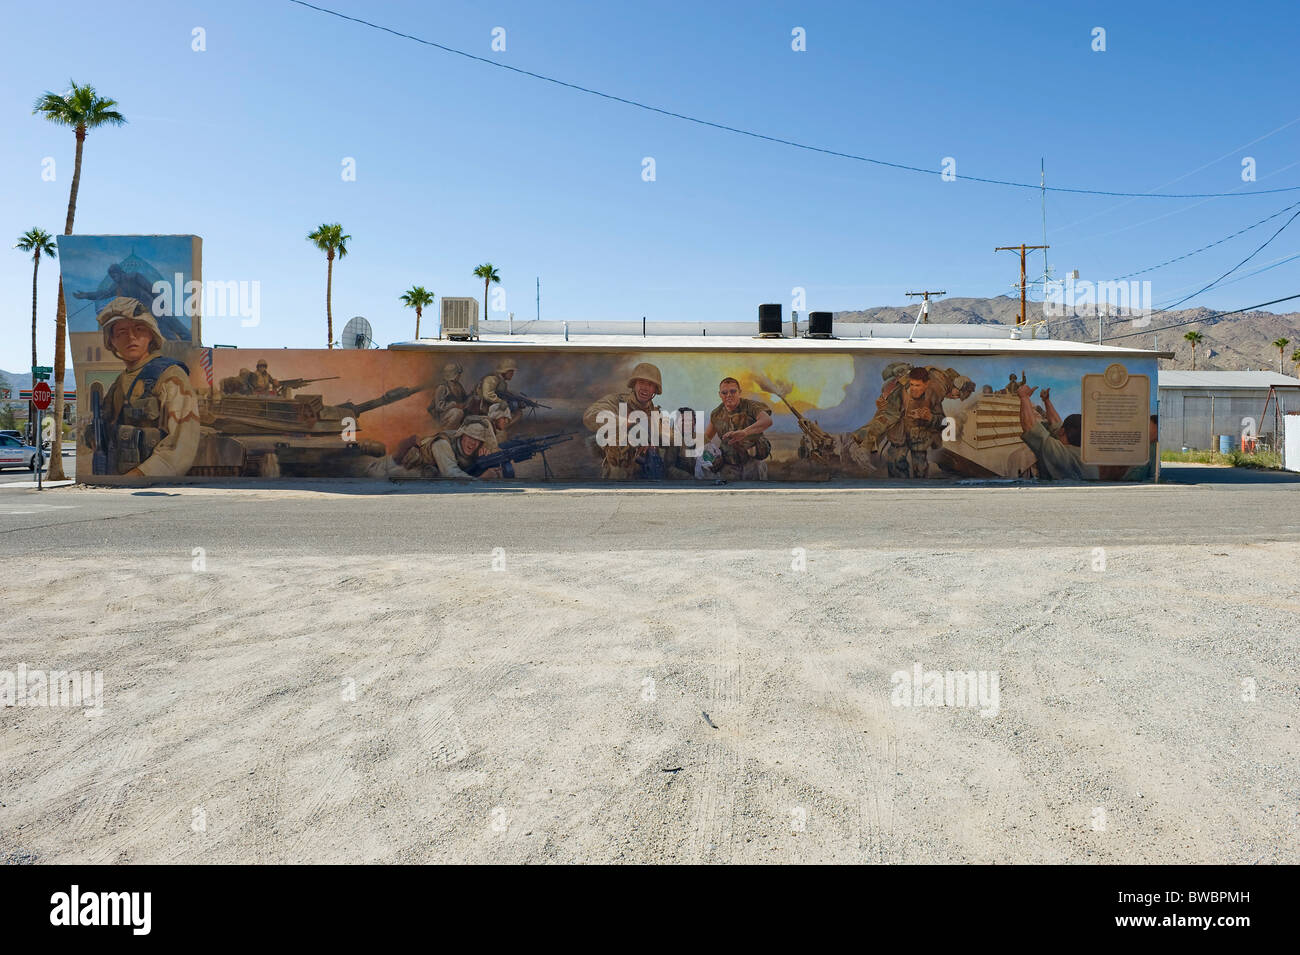 Mural-Painting depicting war and US marines-troops, the mural is located in Twenty Nine Palms, California. Stock Photo